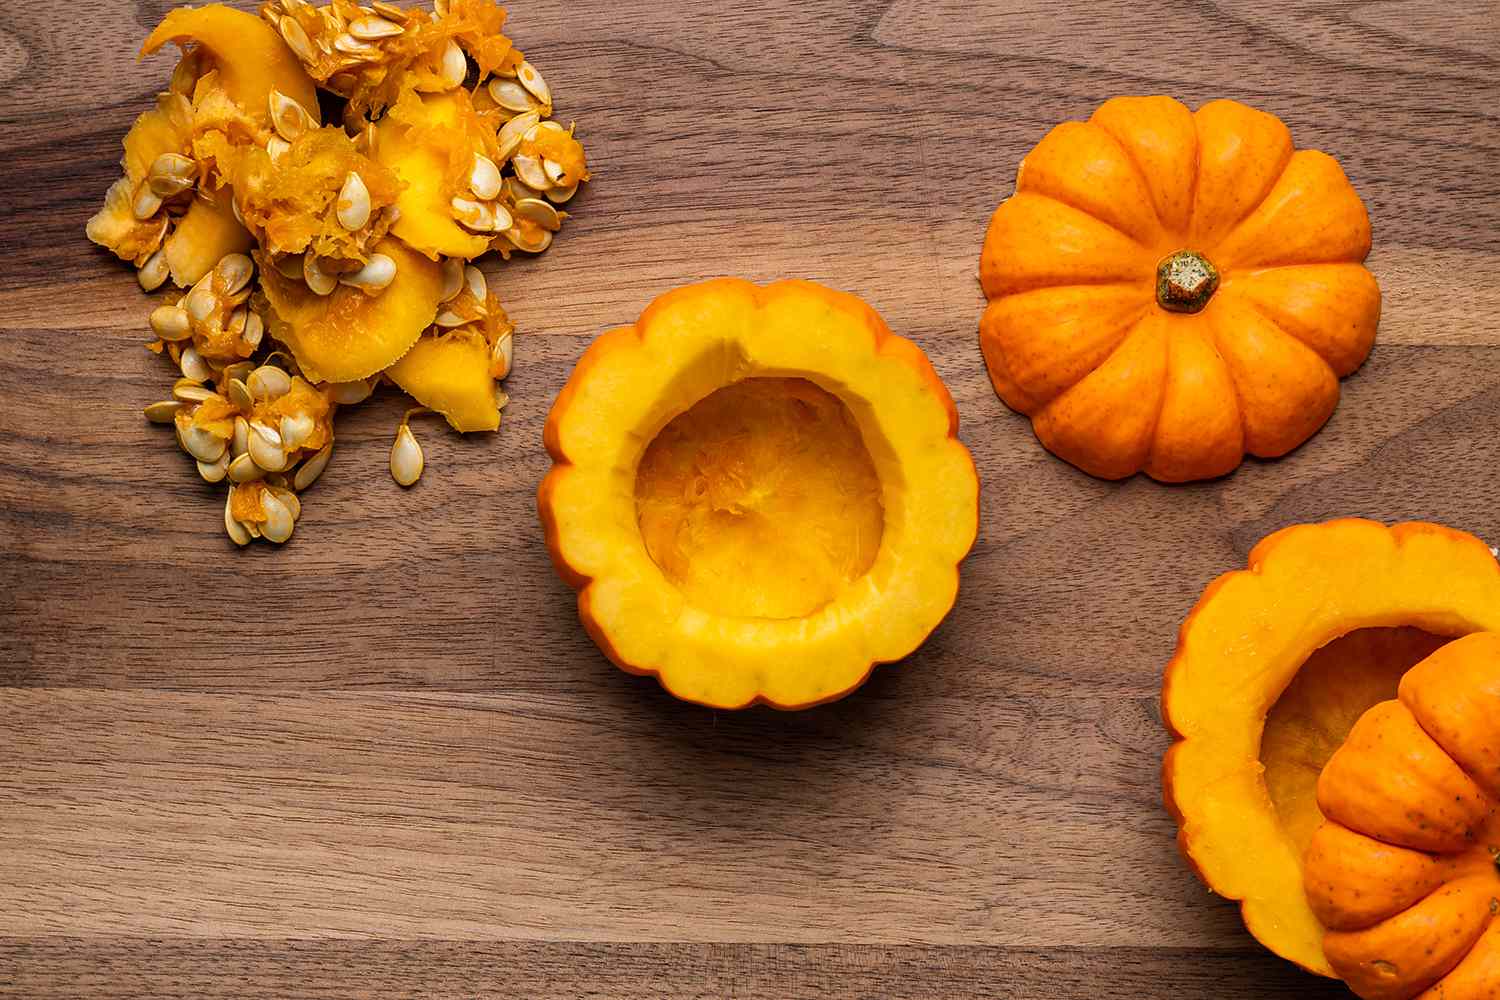 sliced open pumpkins with seeds scooped out